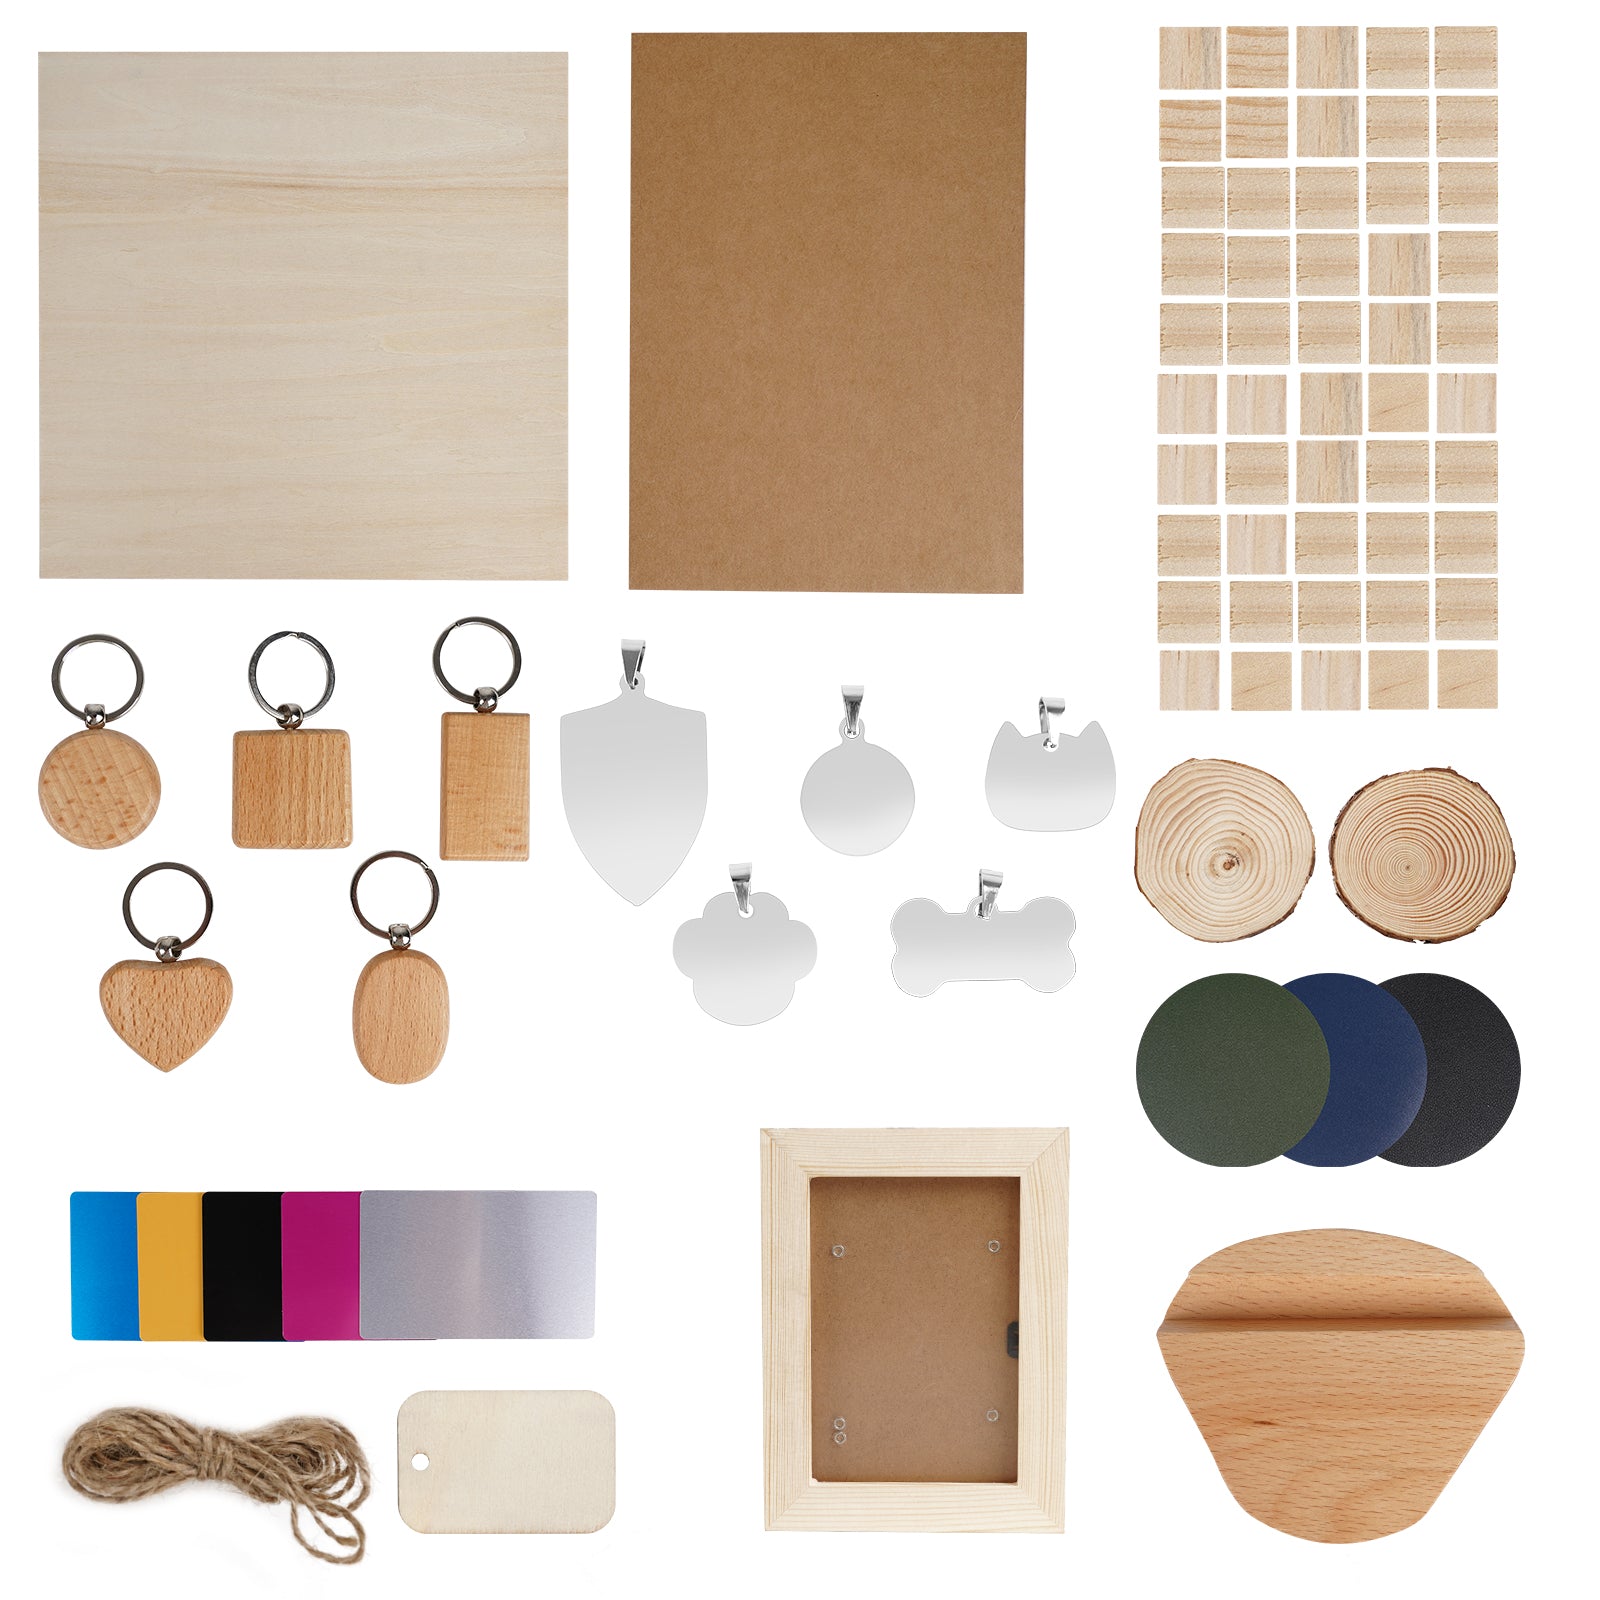 A flat lay of various crafting materials for laser engraver owners, including wooden squares, keychain blanks, metallic pendants, a rope, wooden slices, colored vinyl sheets, a small wooden box, and a wooden stand. The items are neatly arranged on a white background—perfect for DIY projects. Featured product: CrealityFalcon's Laser Material Kit: 11 Types Stainless Steel & Pine Wood for Falcon CNC Laser Engraving.